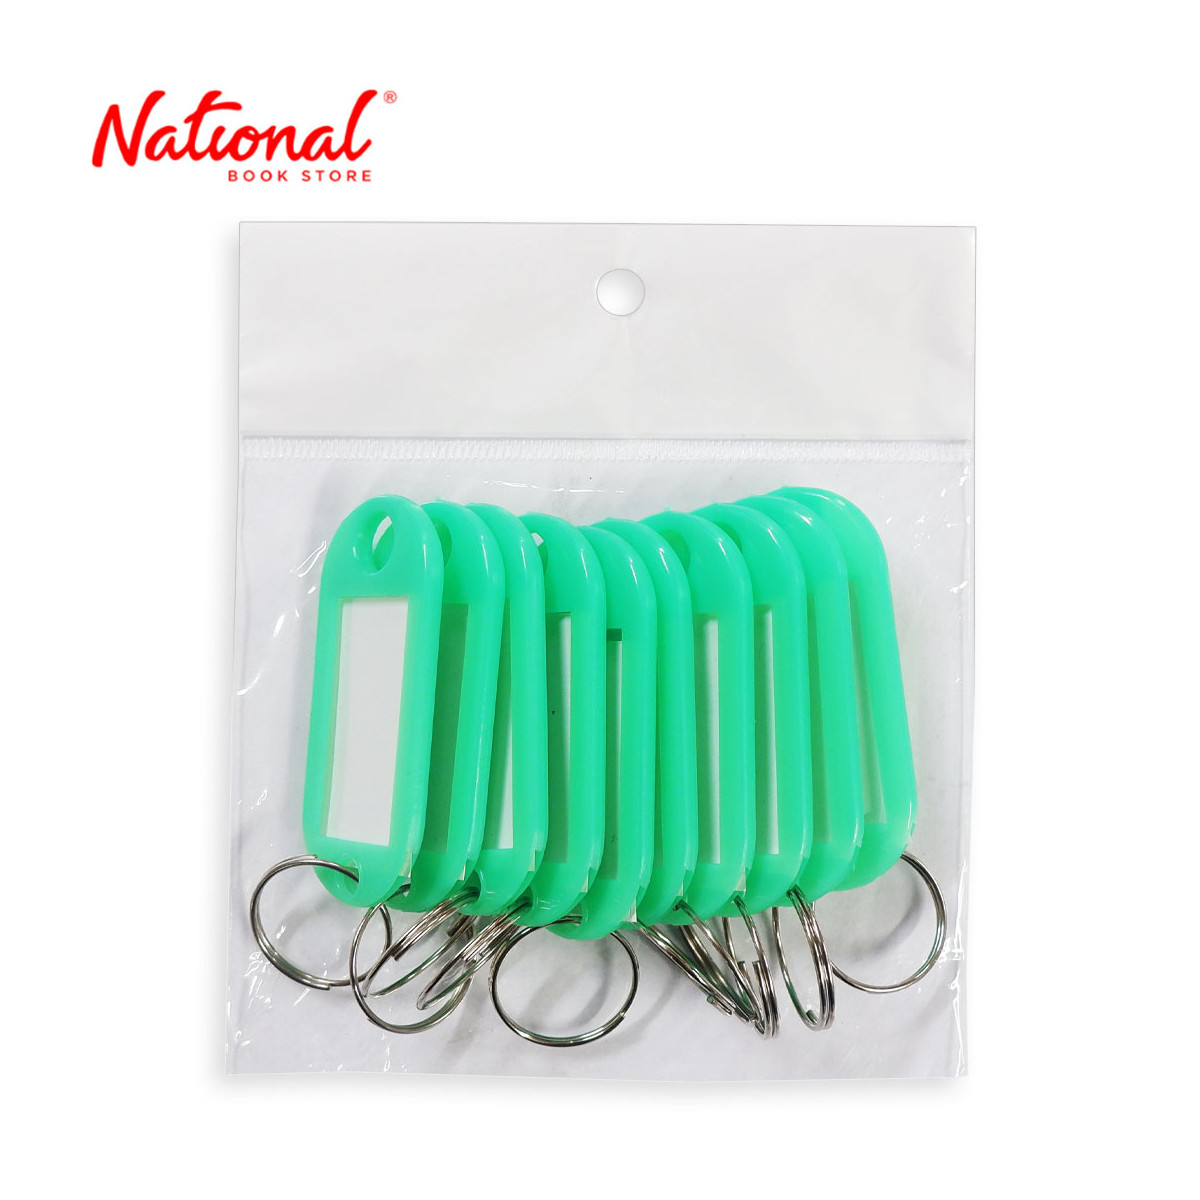 Tiger Key Tags 10 pieces Per Pack, Green - Office Stationery - Filing Accessories